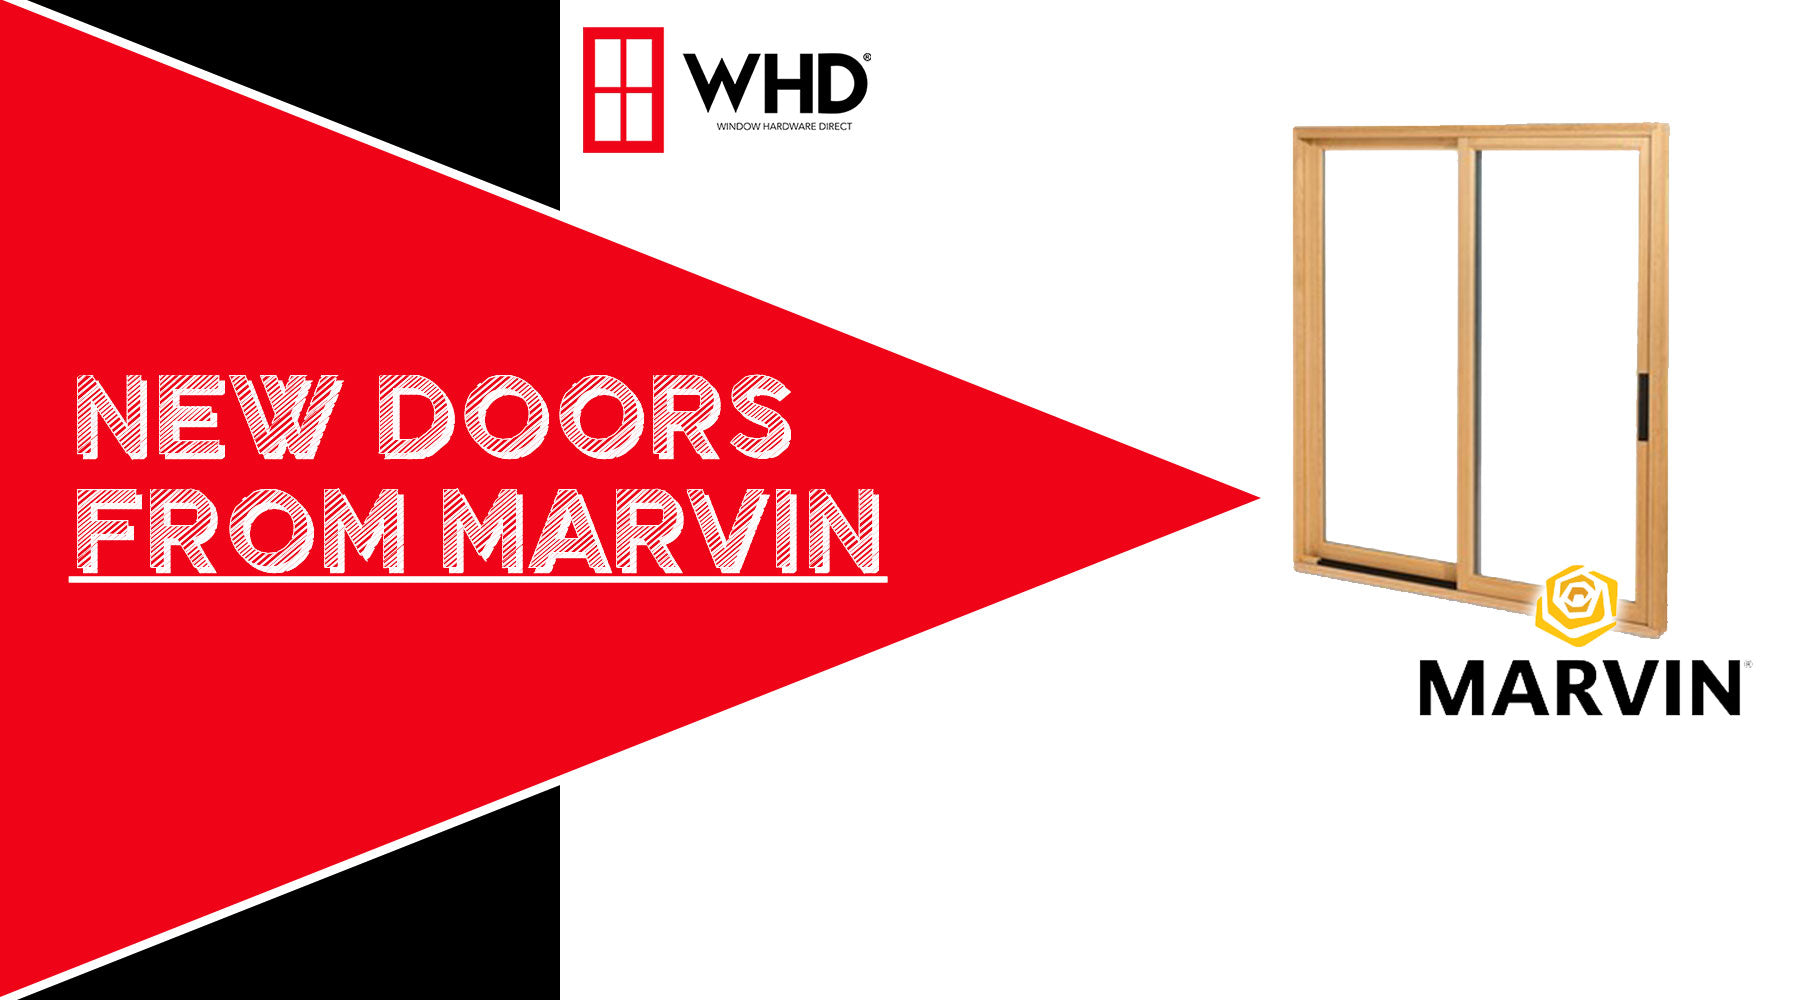 Marvin's New Doors: A Paradigm Shift in Home Design